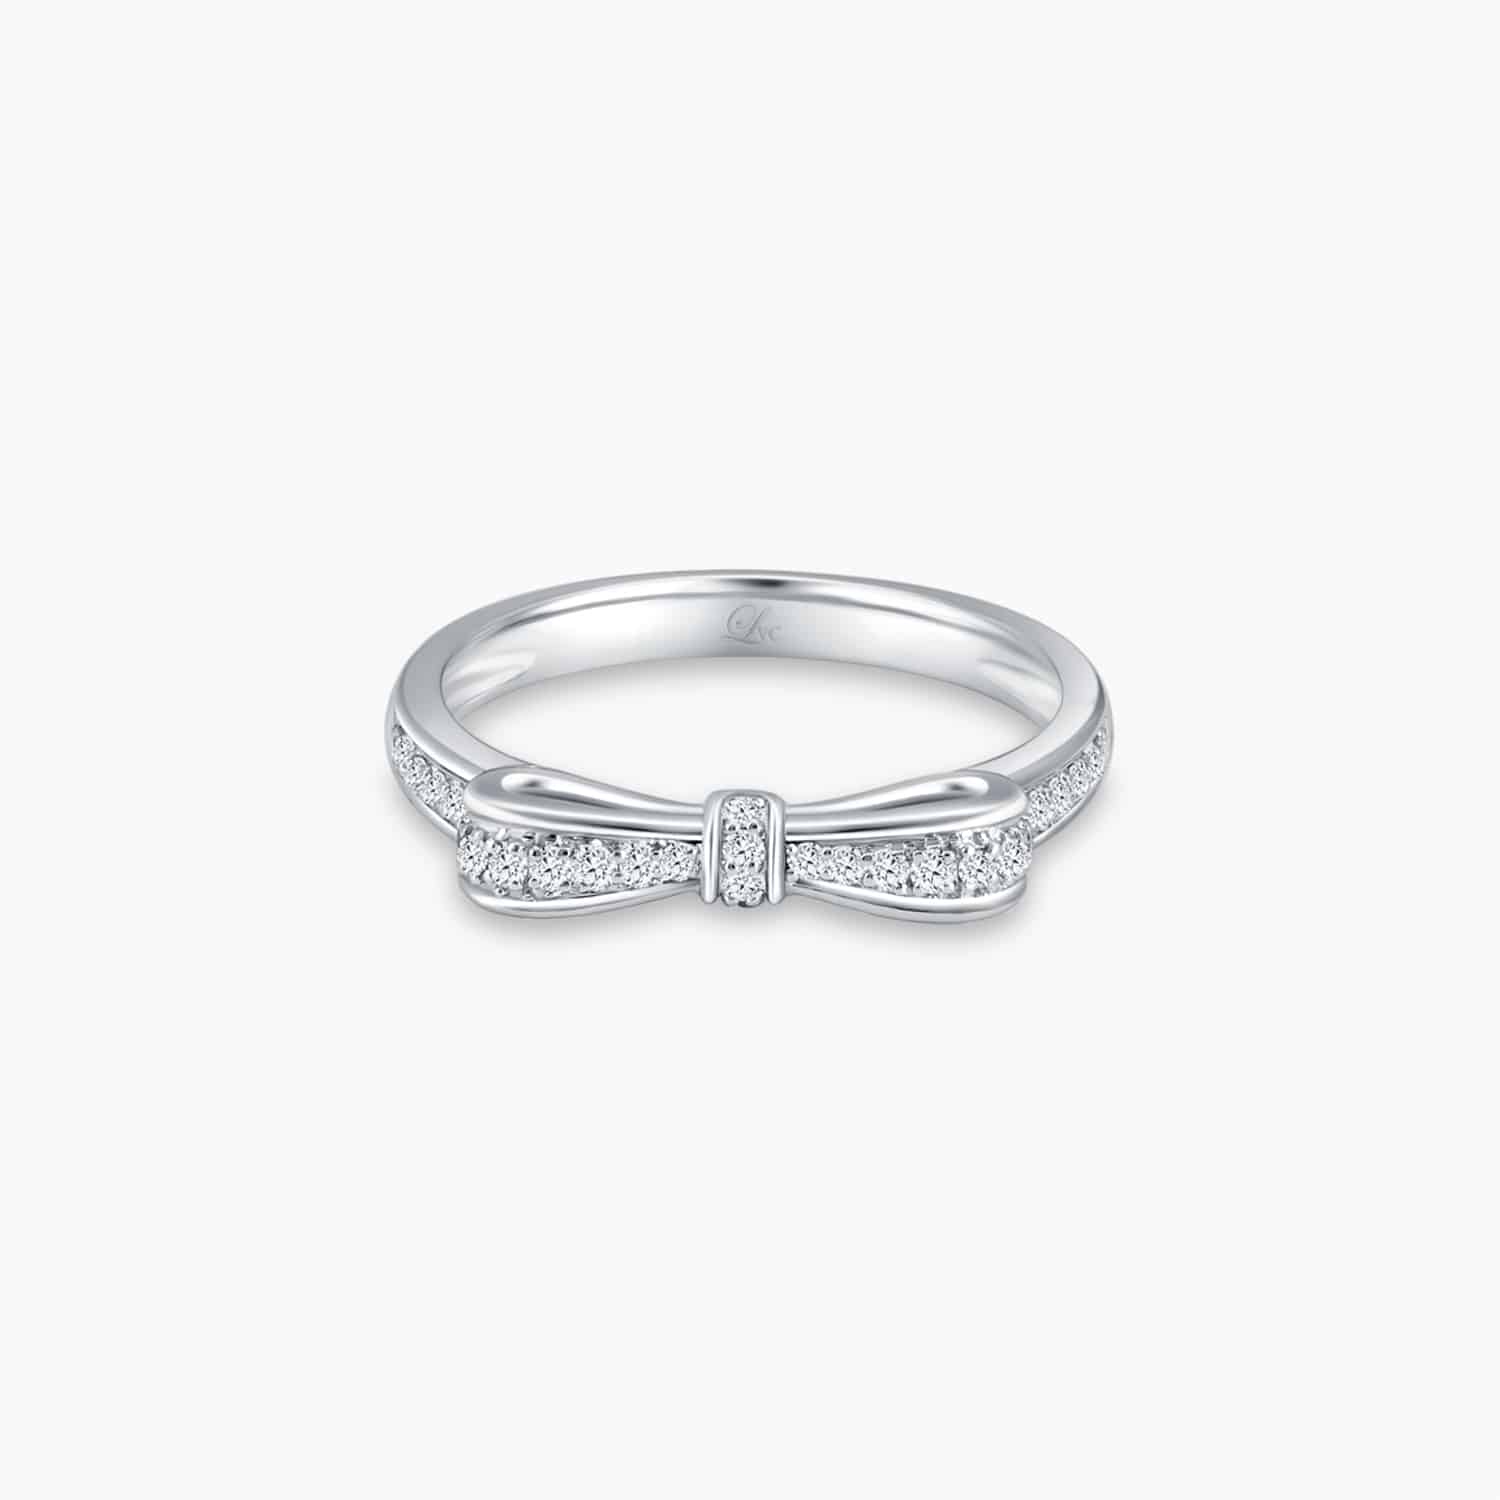 LVC Noeud Straight Women's Wedding Ring & Wedding Band in White Gold with Diamonds